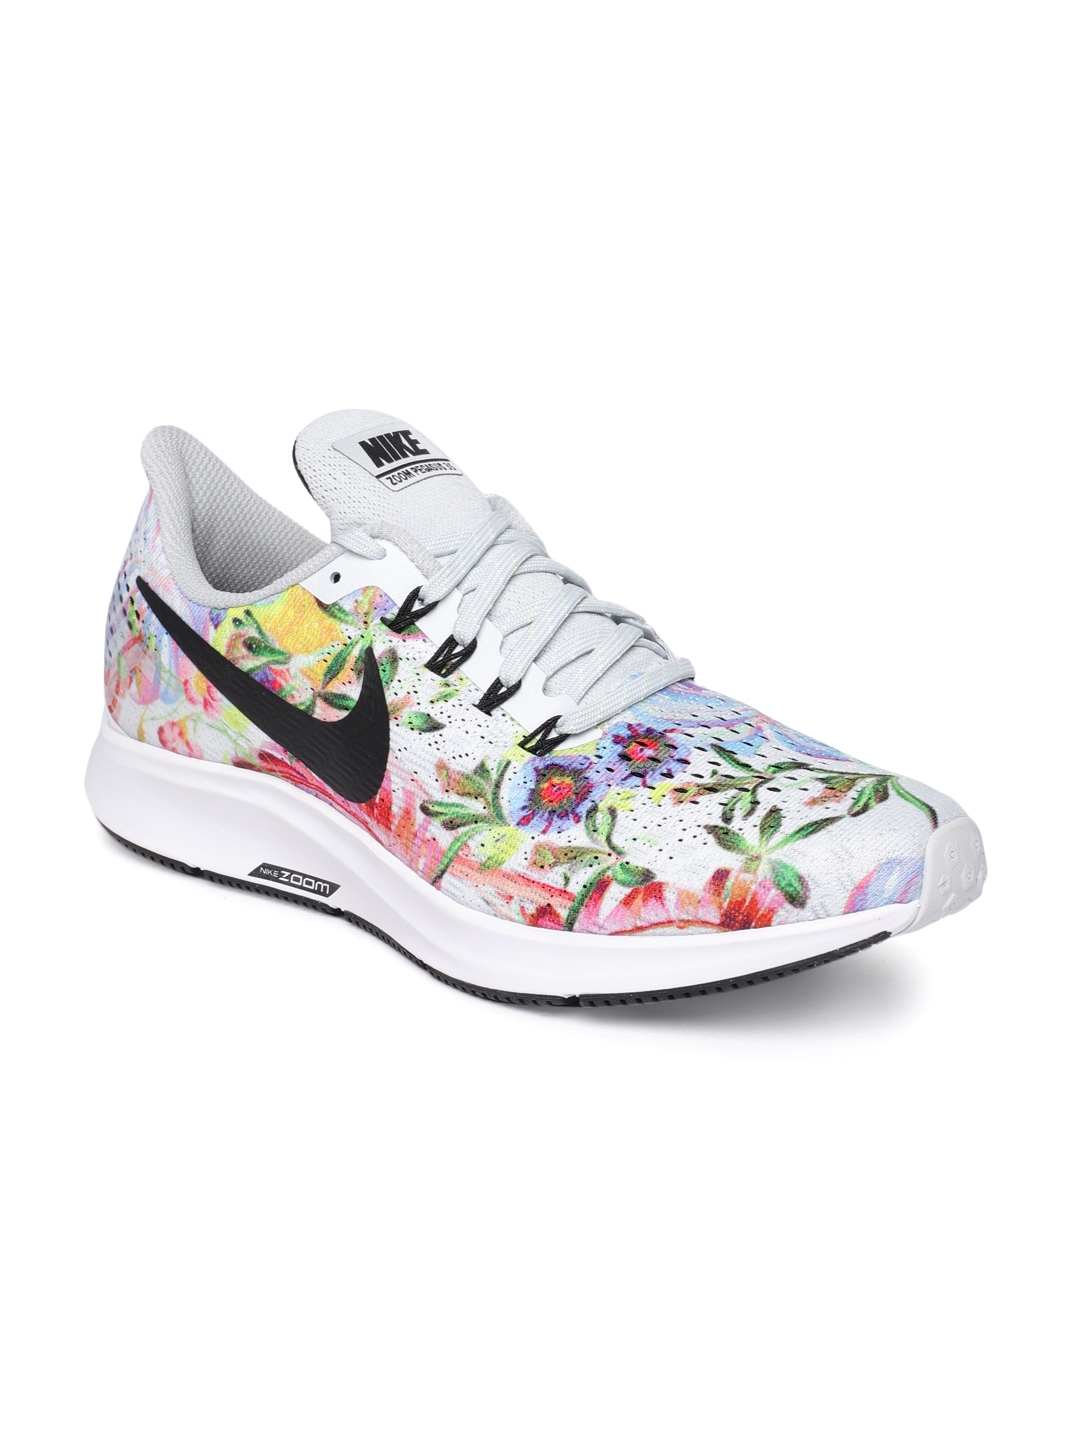 nike patterned shoes